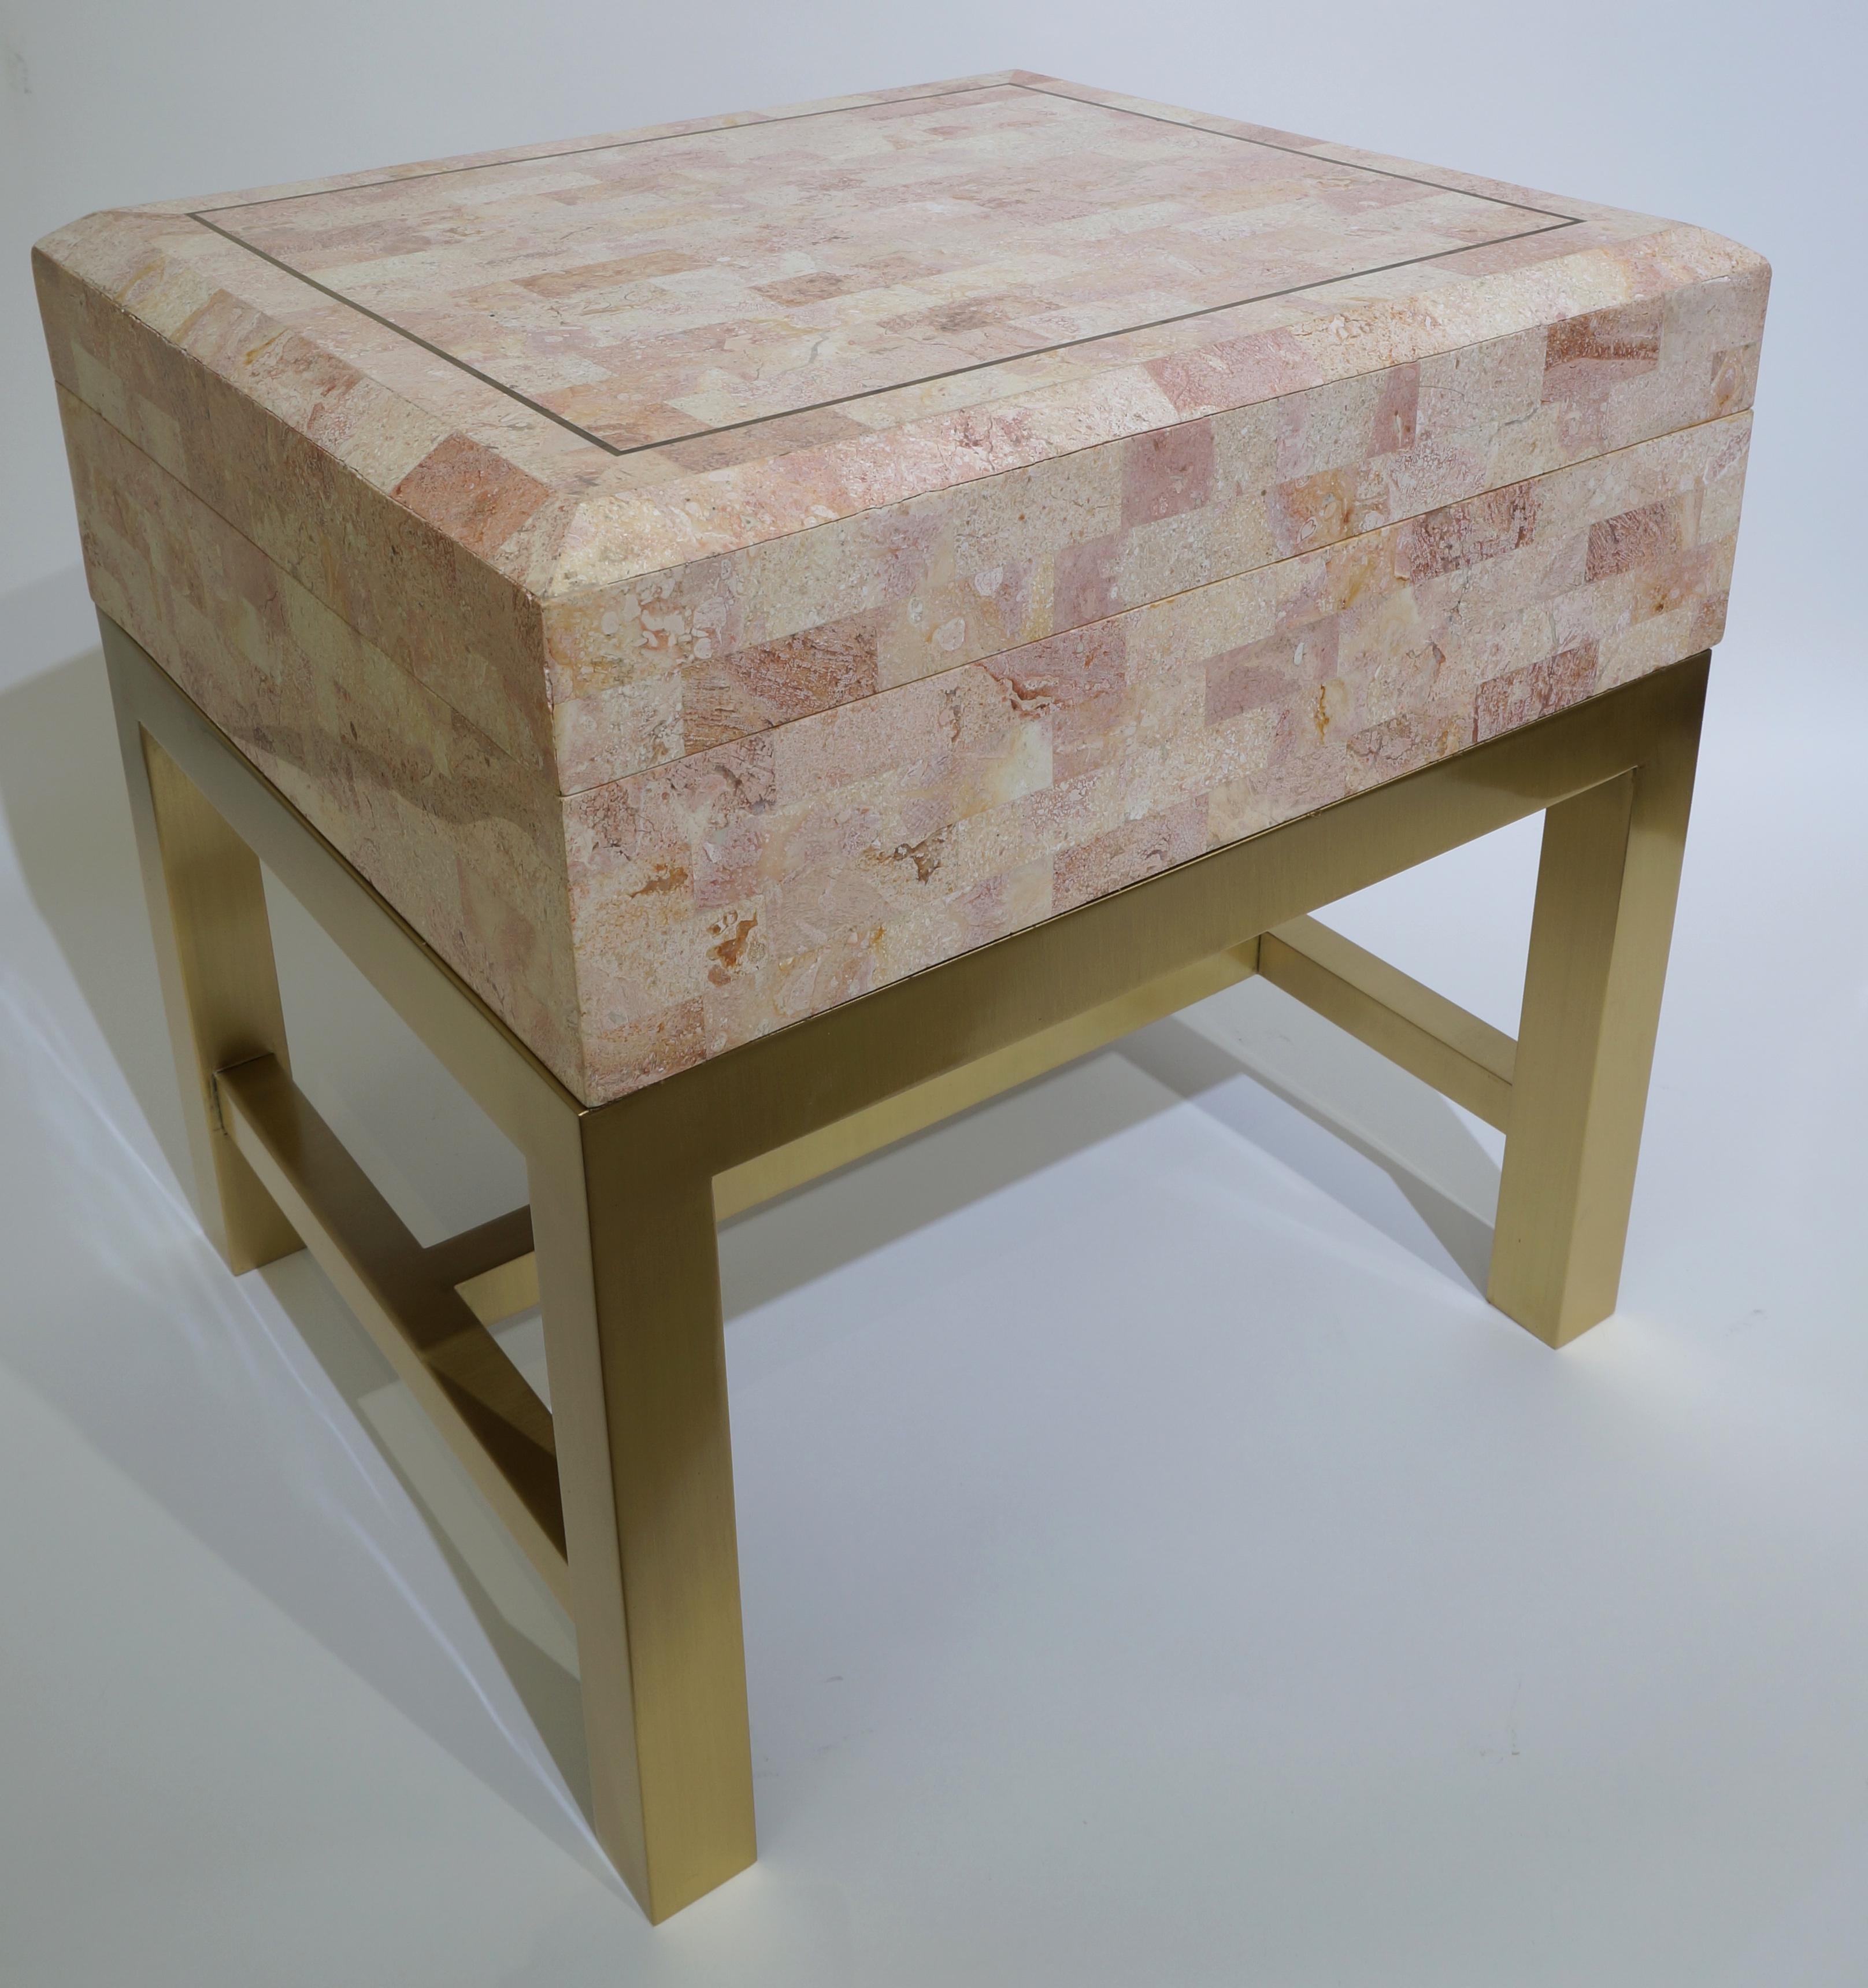 Vintage Maitland Smith Tessellated marble box on satin polished brass stand from a Palm Beach estate

This piece will make the perfect side table as it can store those unsightly remote controls and coasters. The piece was made by Maitland Smith